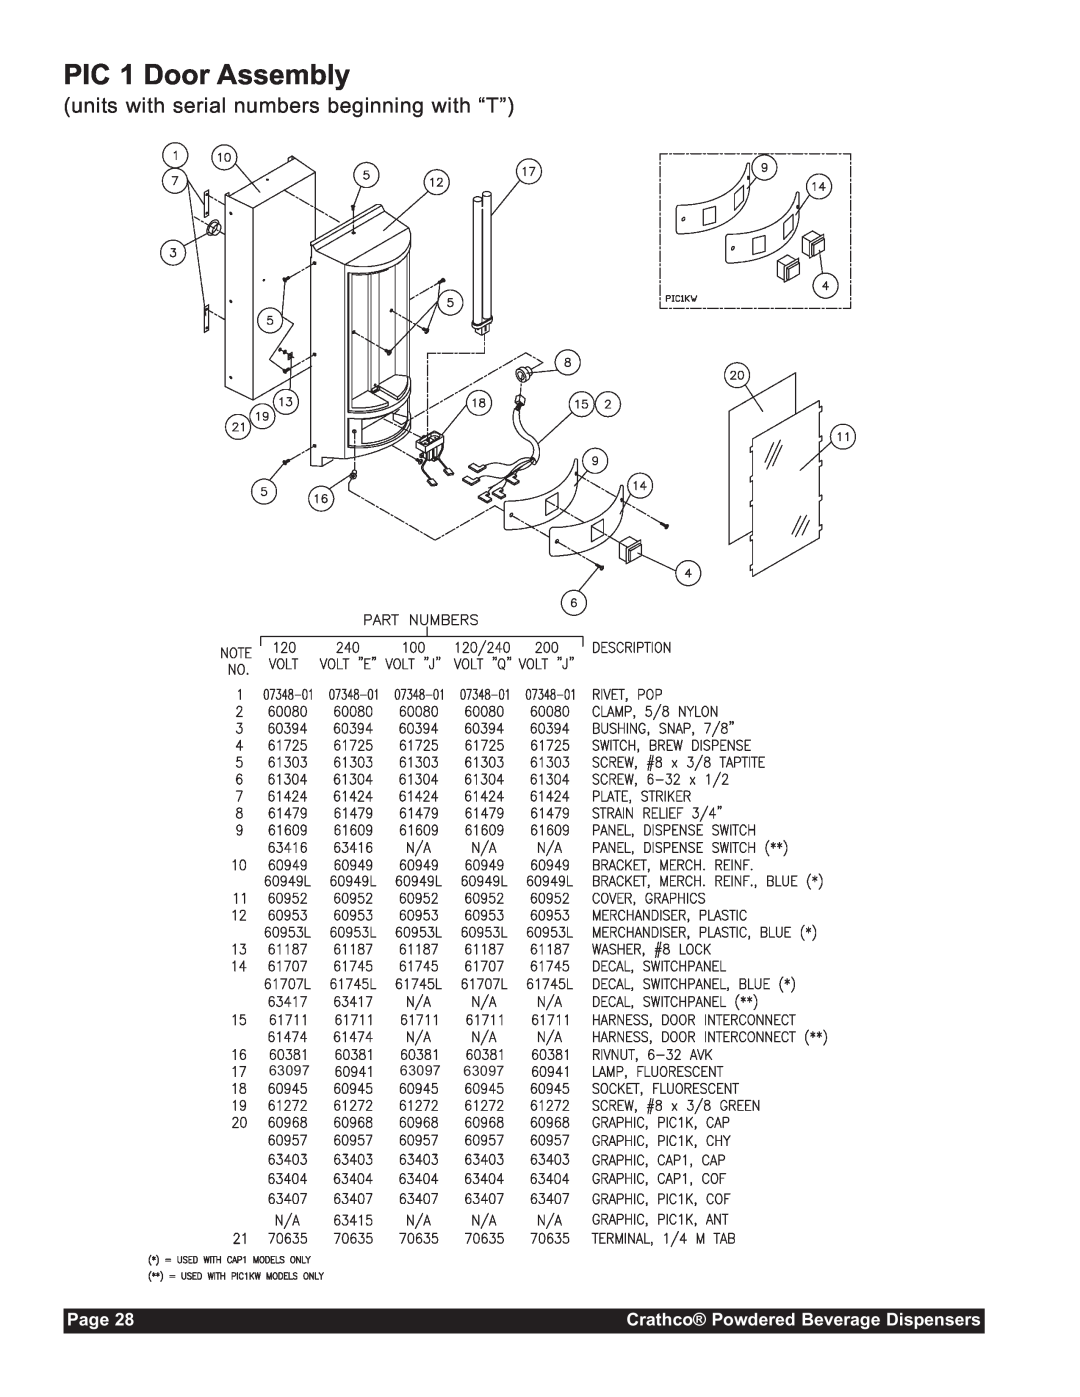 Grindmaster CC-302-20 service manual PIC 1 Door Assembly, units with serial numbers beginning with “T”, Page 